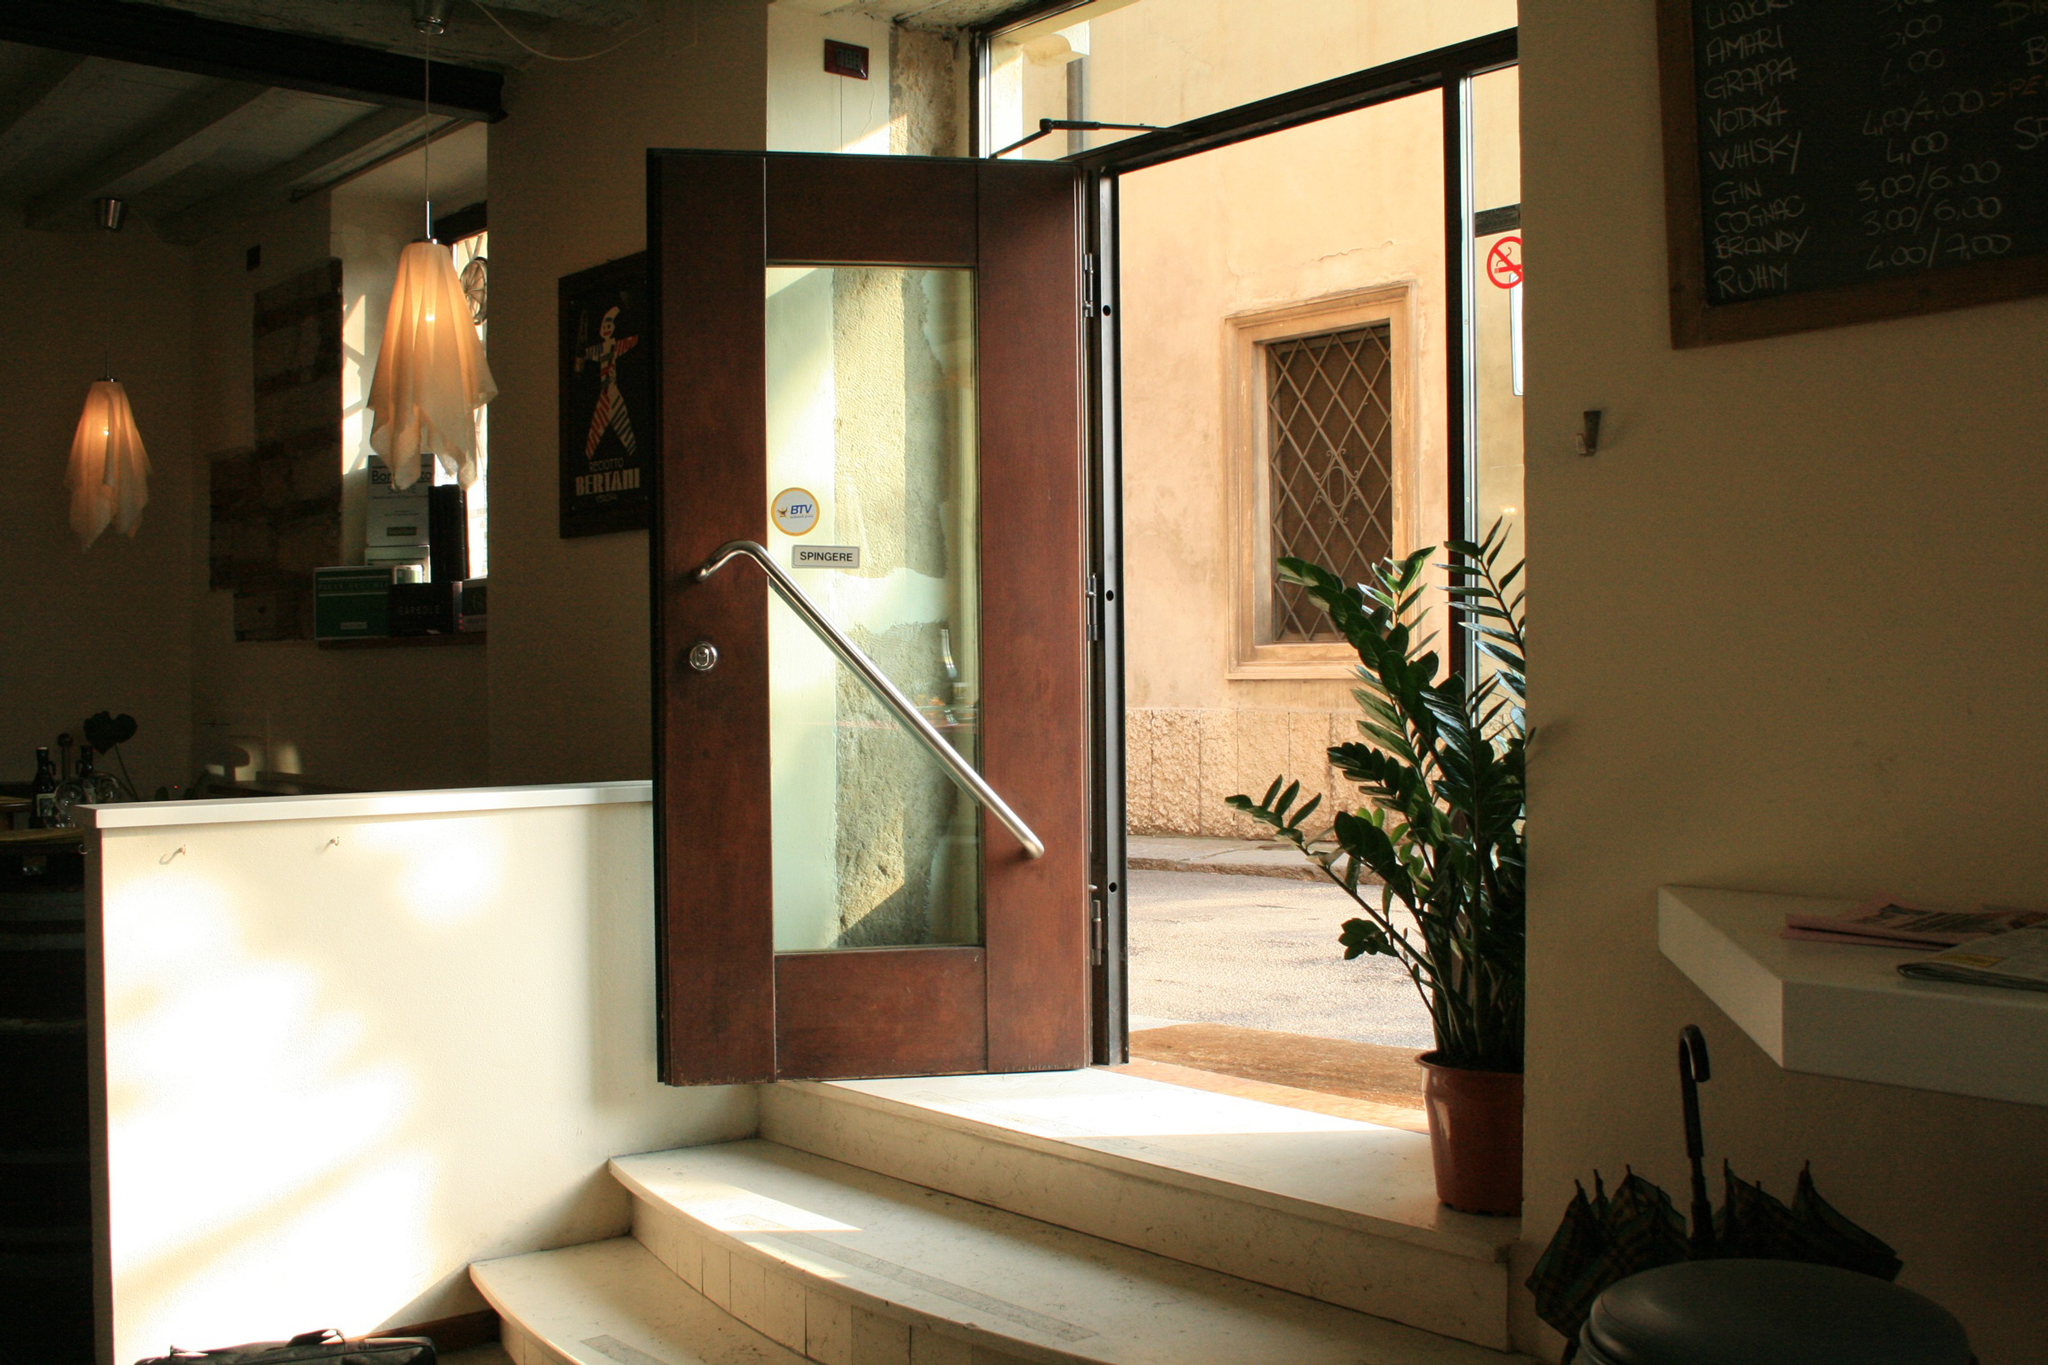 A photo of a security door in an entry way